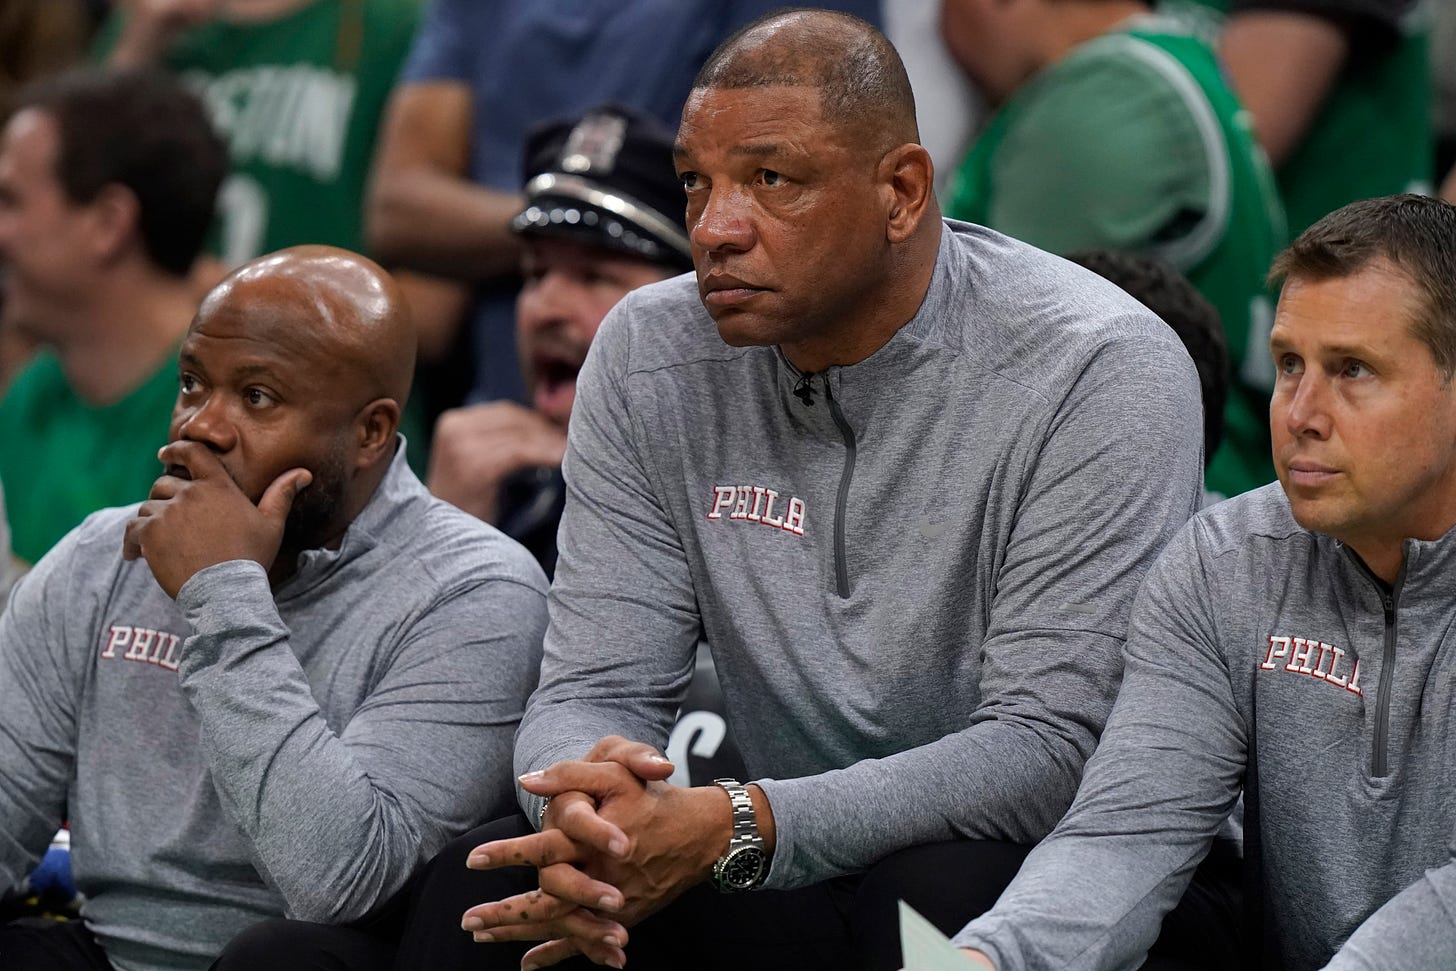 Doc Rivers' 76ers future sounds tenuous after playoff loss